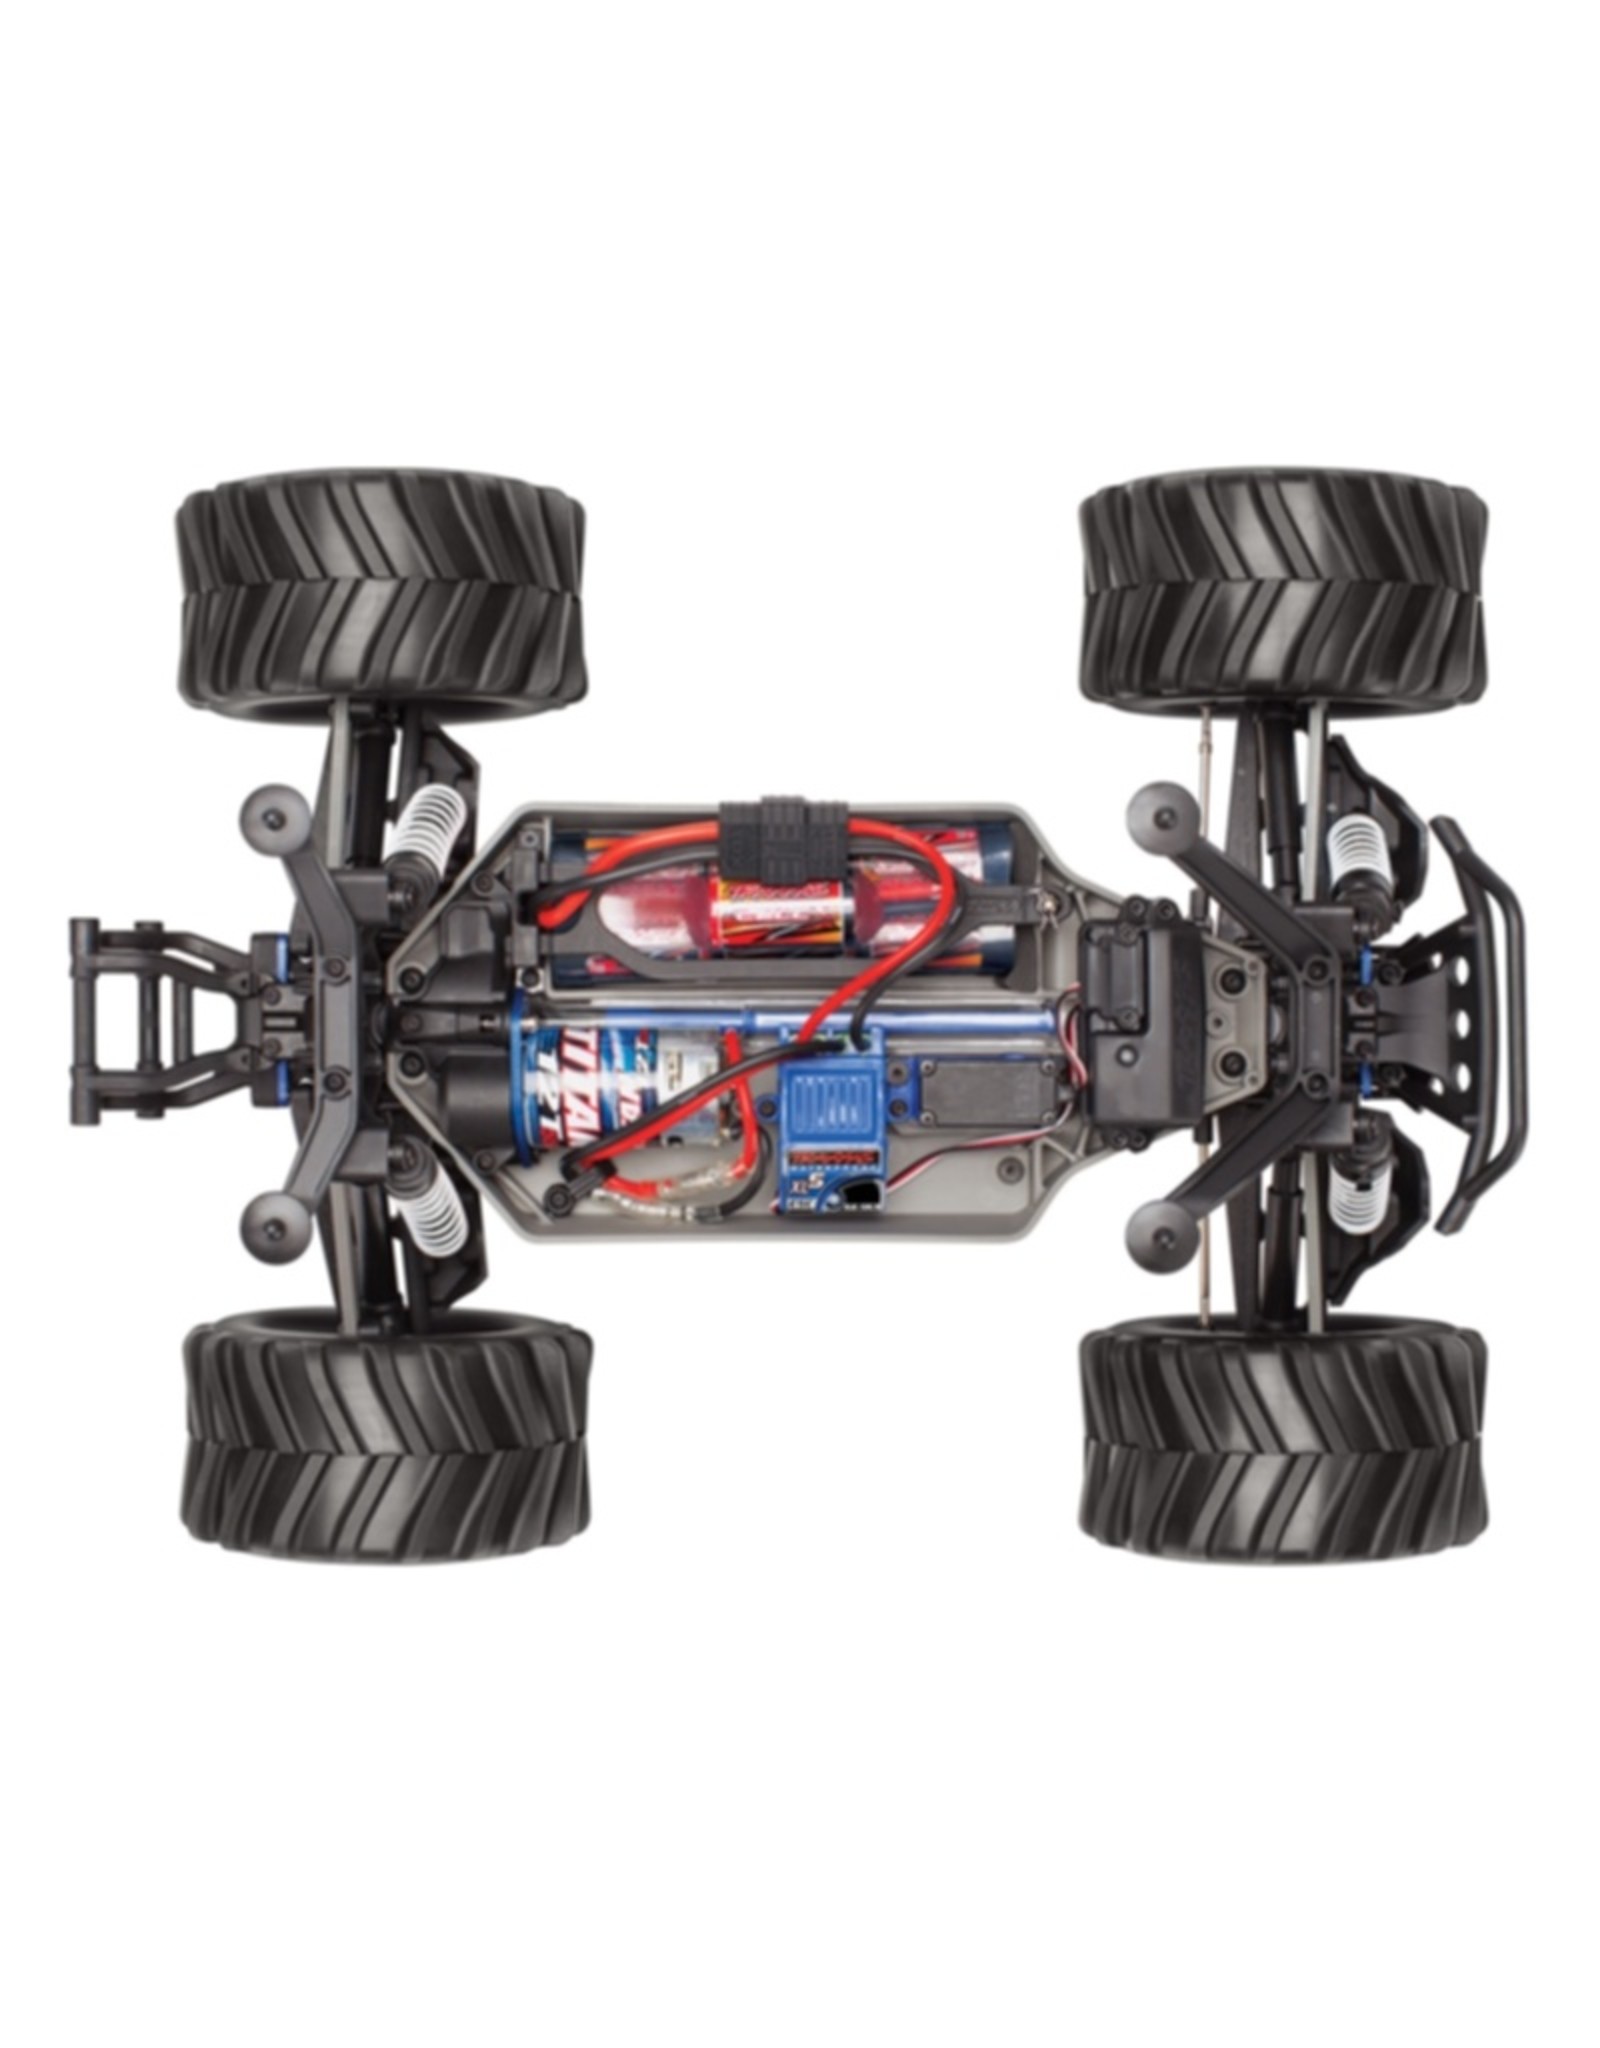 Traxxas TRA67054-1-BLUE Stampede® 4X4 : 1/10-scale 4WD Monster Truck. Ready-To-Race® with TQ 2.4GHz radio system and XL-5 ESC (fwd/rev). Includes: 7-Cell NiMH 3000mAh Traxxas® batte